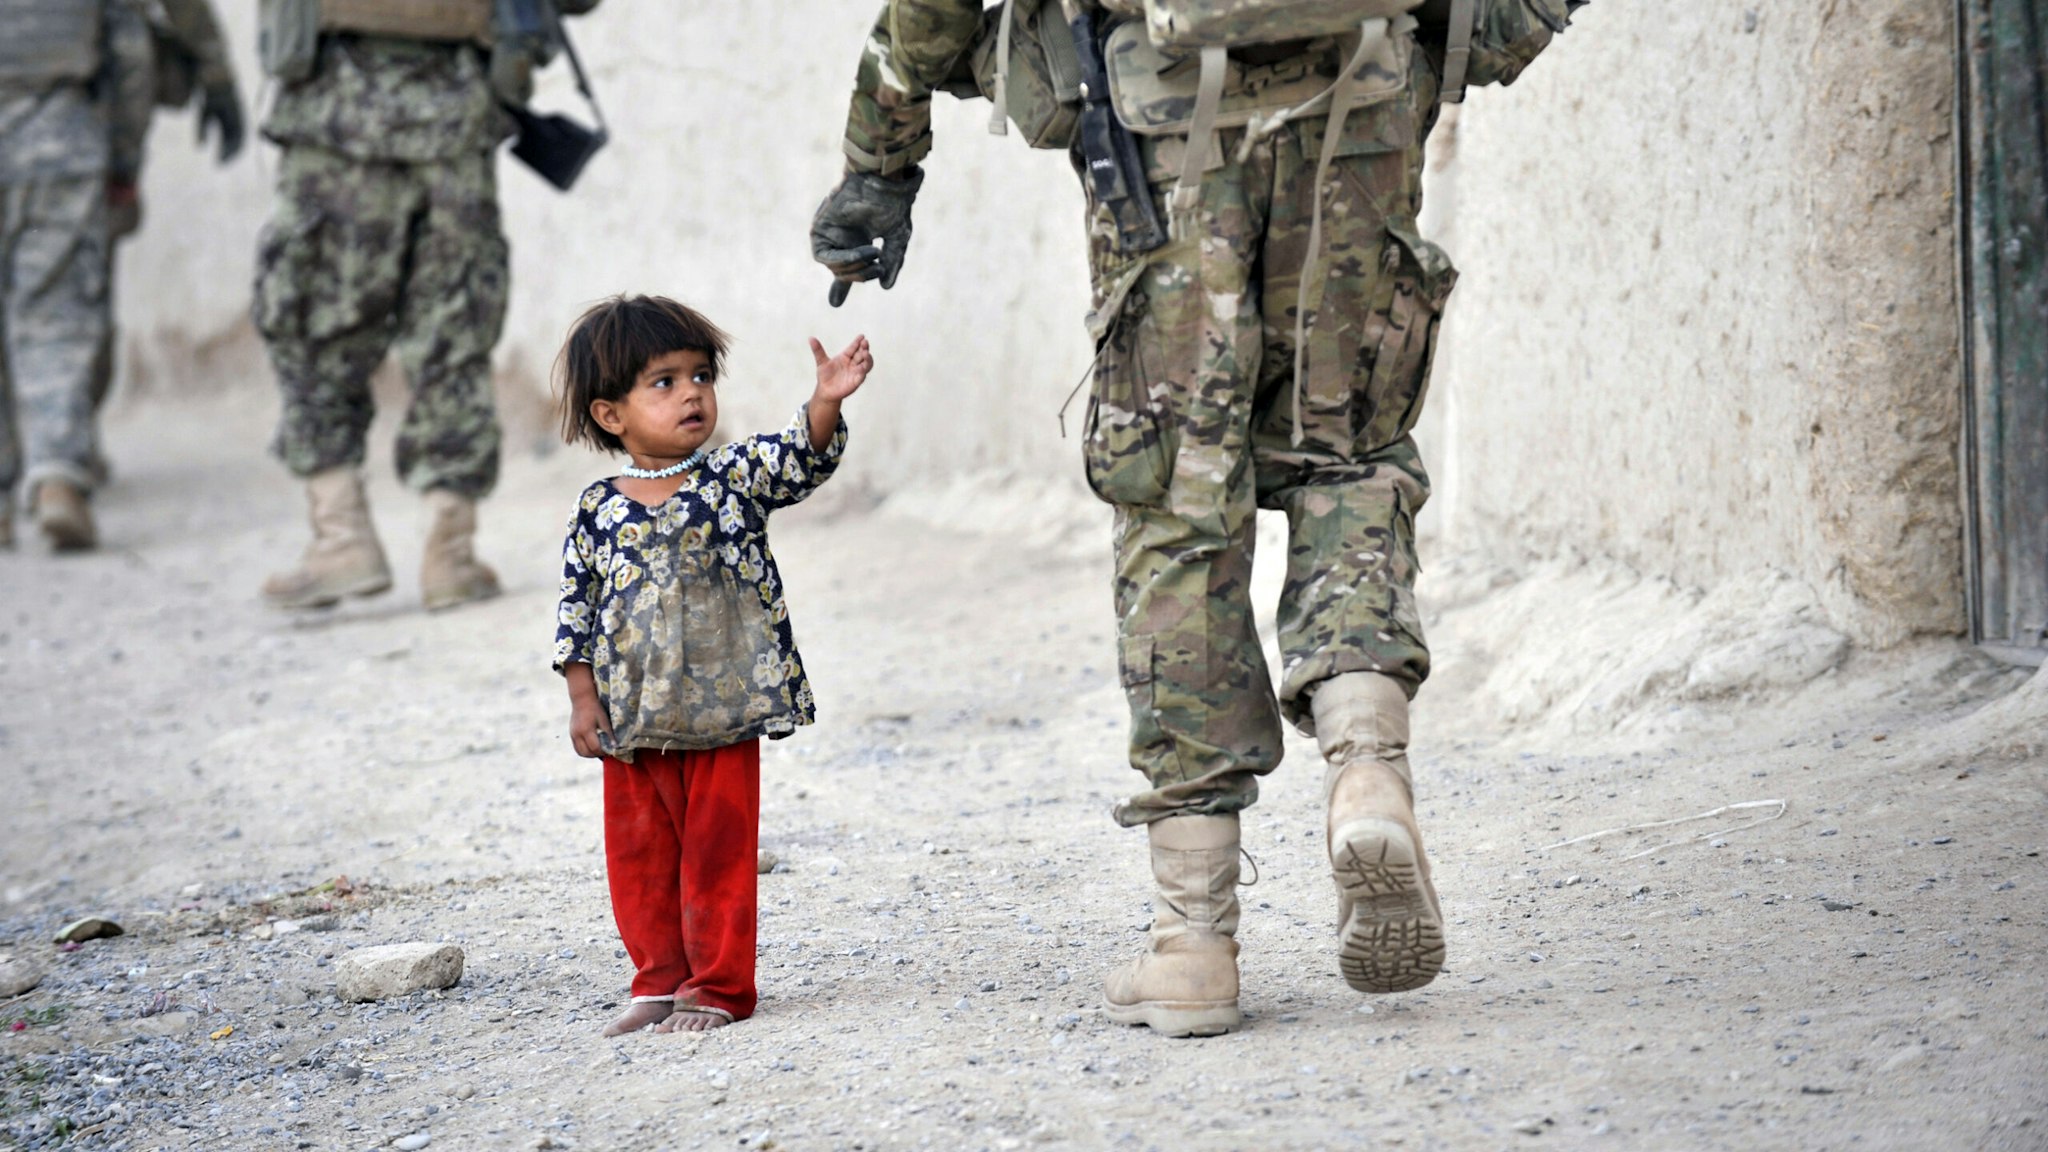 An Afghan girl greets a joint patrol of US troops from the Charlie Company, 2-87 Infantry, 3rd Brigade Combat Team and Afghan National Army soldiers at Kandalay village in the southern Afghan province of Kandahar on August 8, 2011 while US troops launched missile attacks on Taliban targets in nearby Kelawai village killing at least three and capturing two insurgents. US forces push their counterinsurgency efforts to battle for the hearts and minds of the local population. AFP PHOTO / ROMEO GACAD (Photo by Romeo GACAD / AFP) (Photo by ROMEO GACAD/AFP via Getty Images)